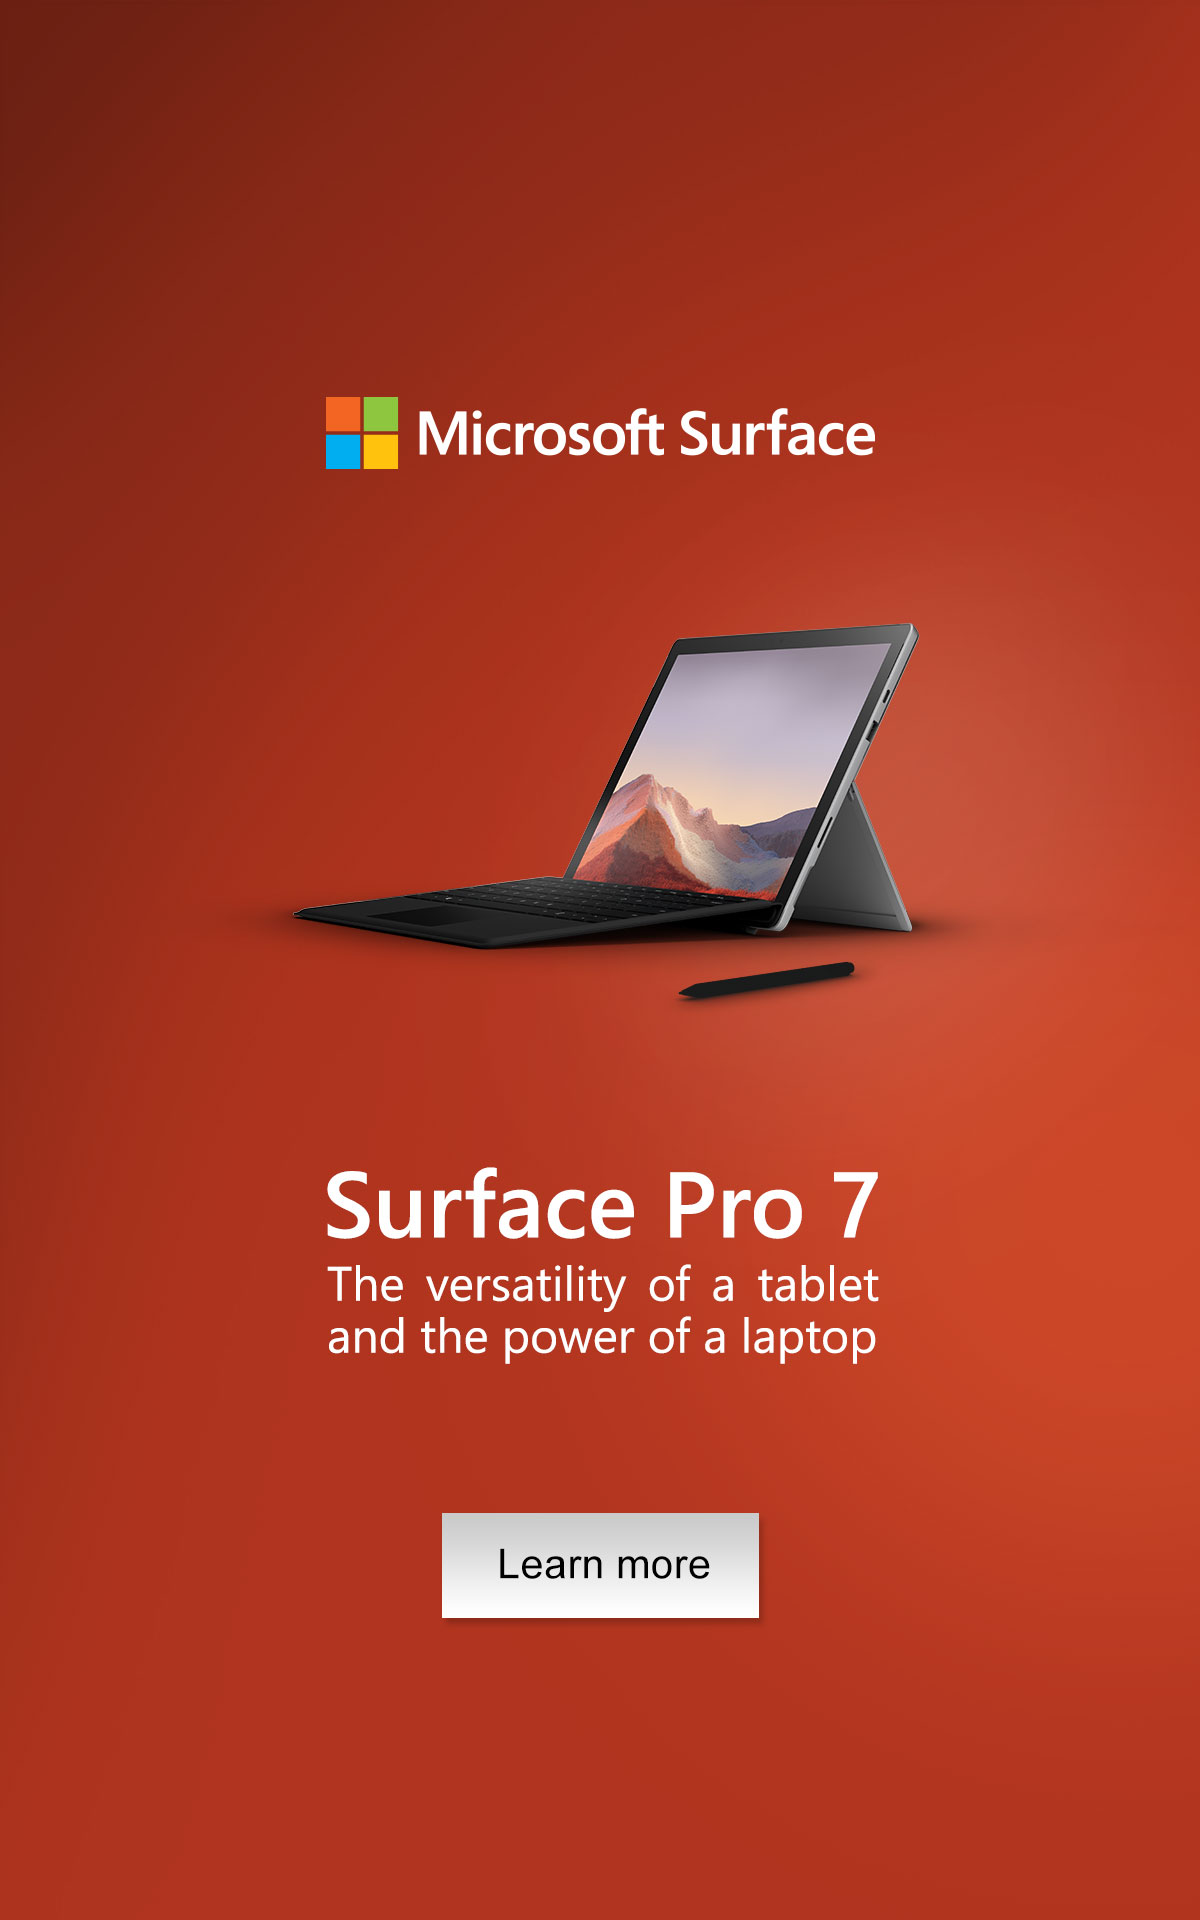 Client: Microsoft. Description: Targeted web banners for Surface Pro 7 on social media platforms.